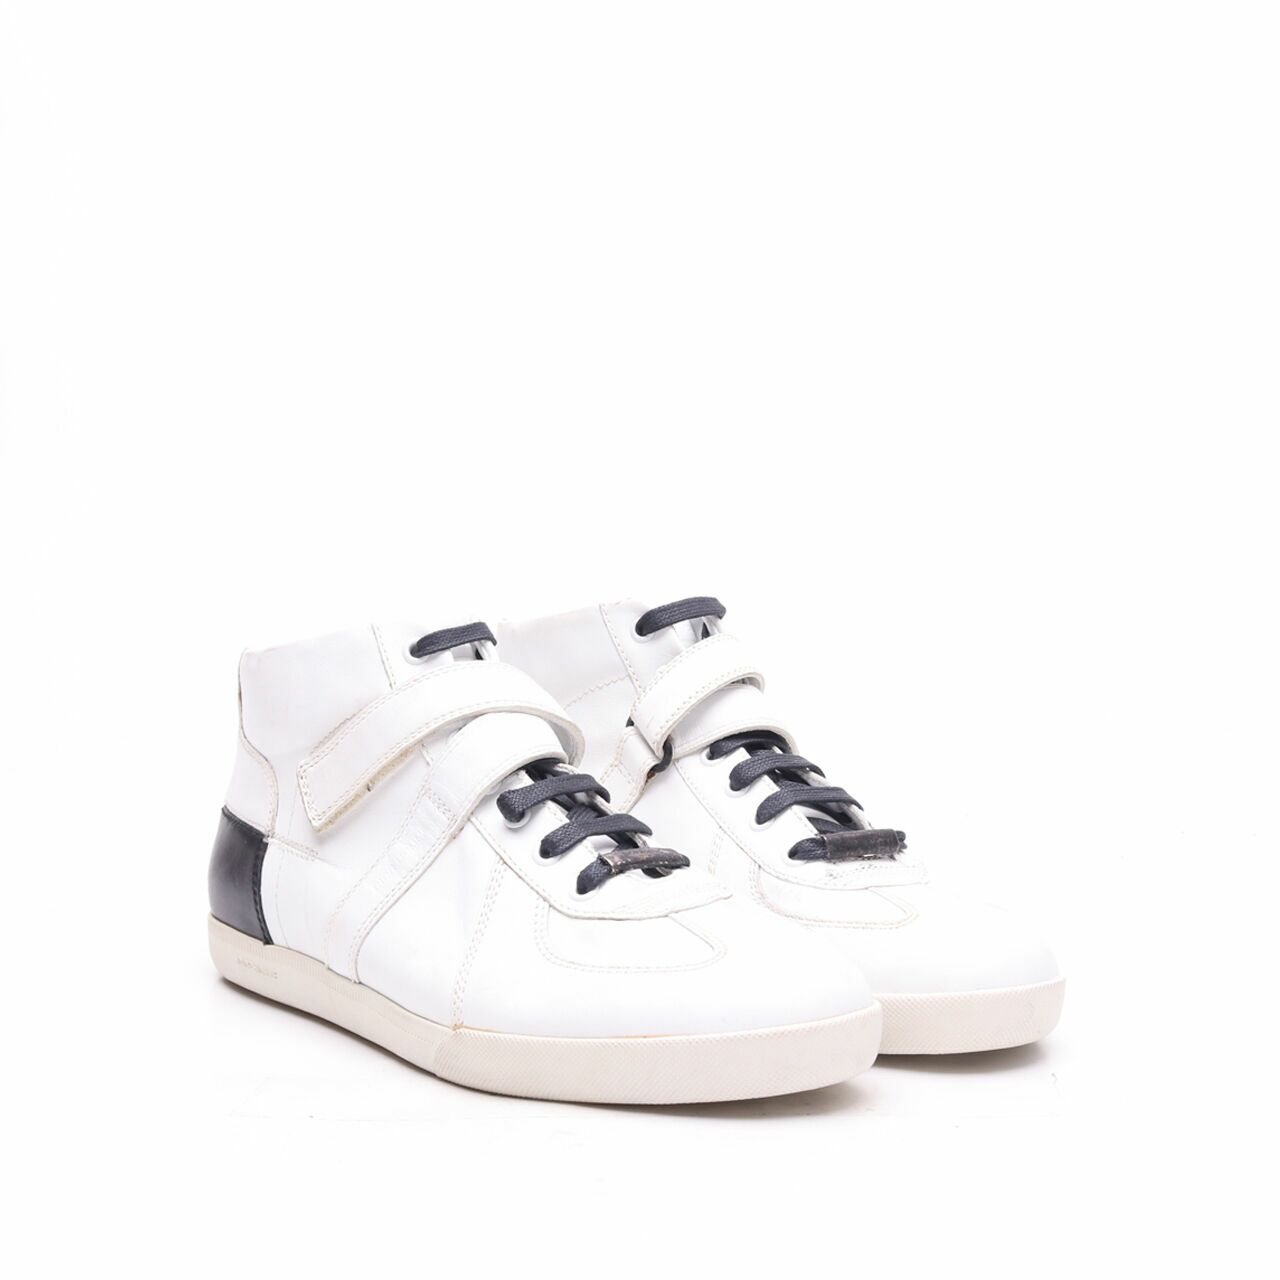 Christian Dior White Mid-Top Sneakers